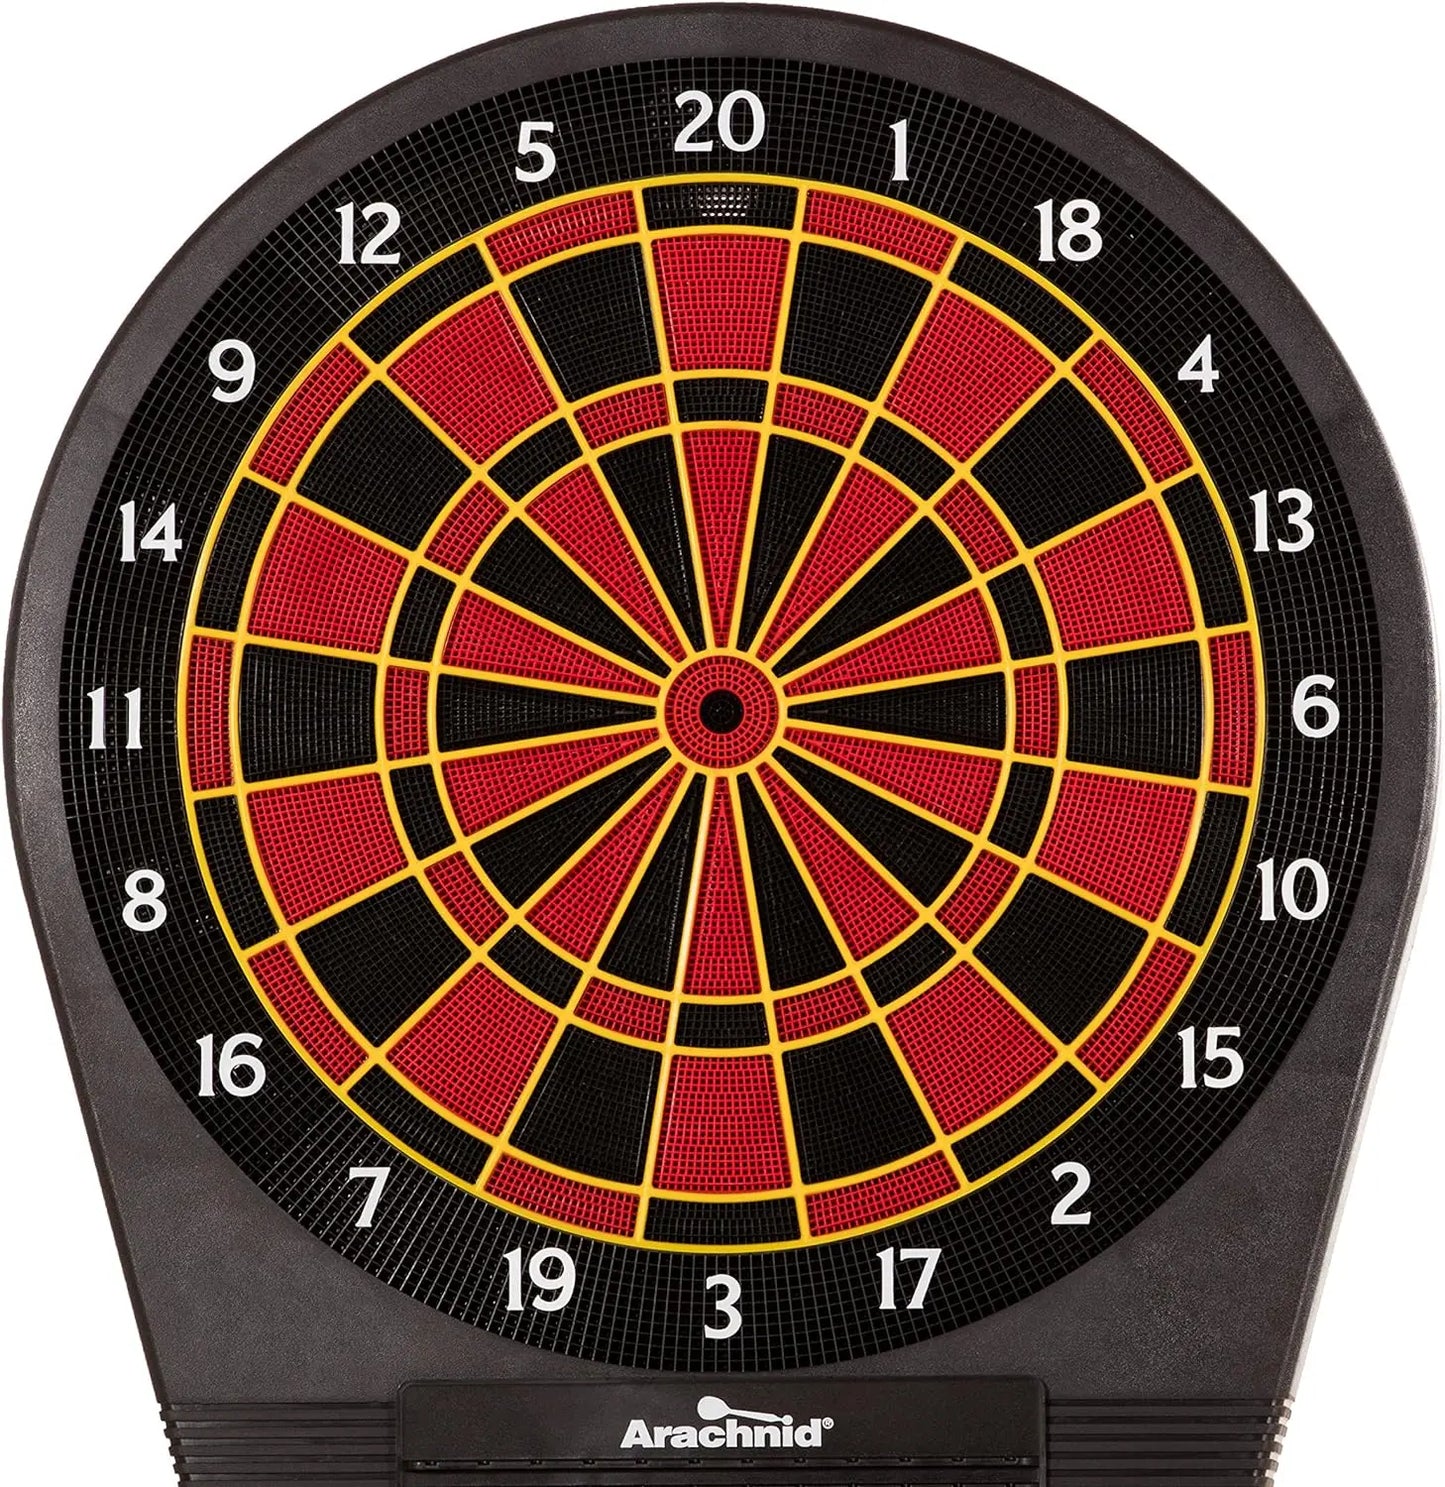 Tournament-Quality Dartboard with 35 Games